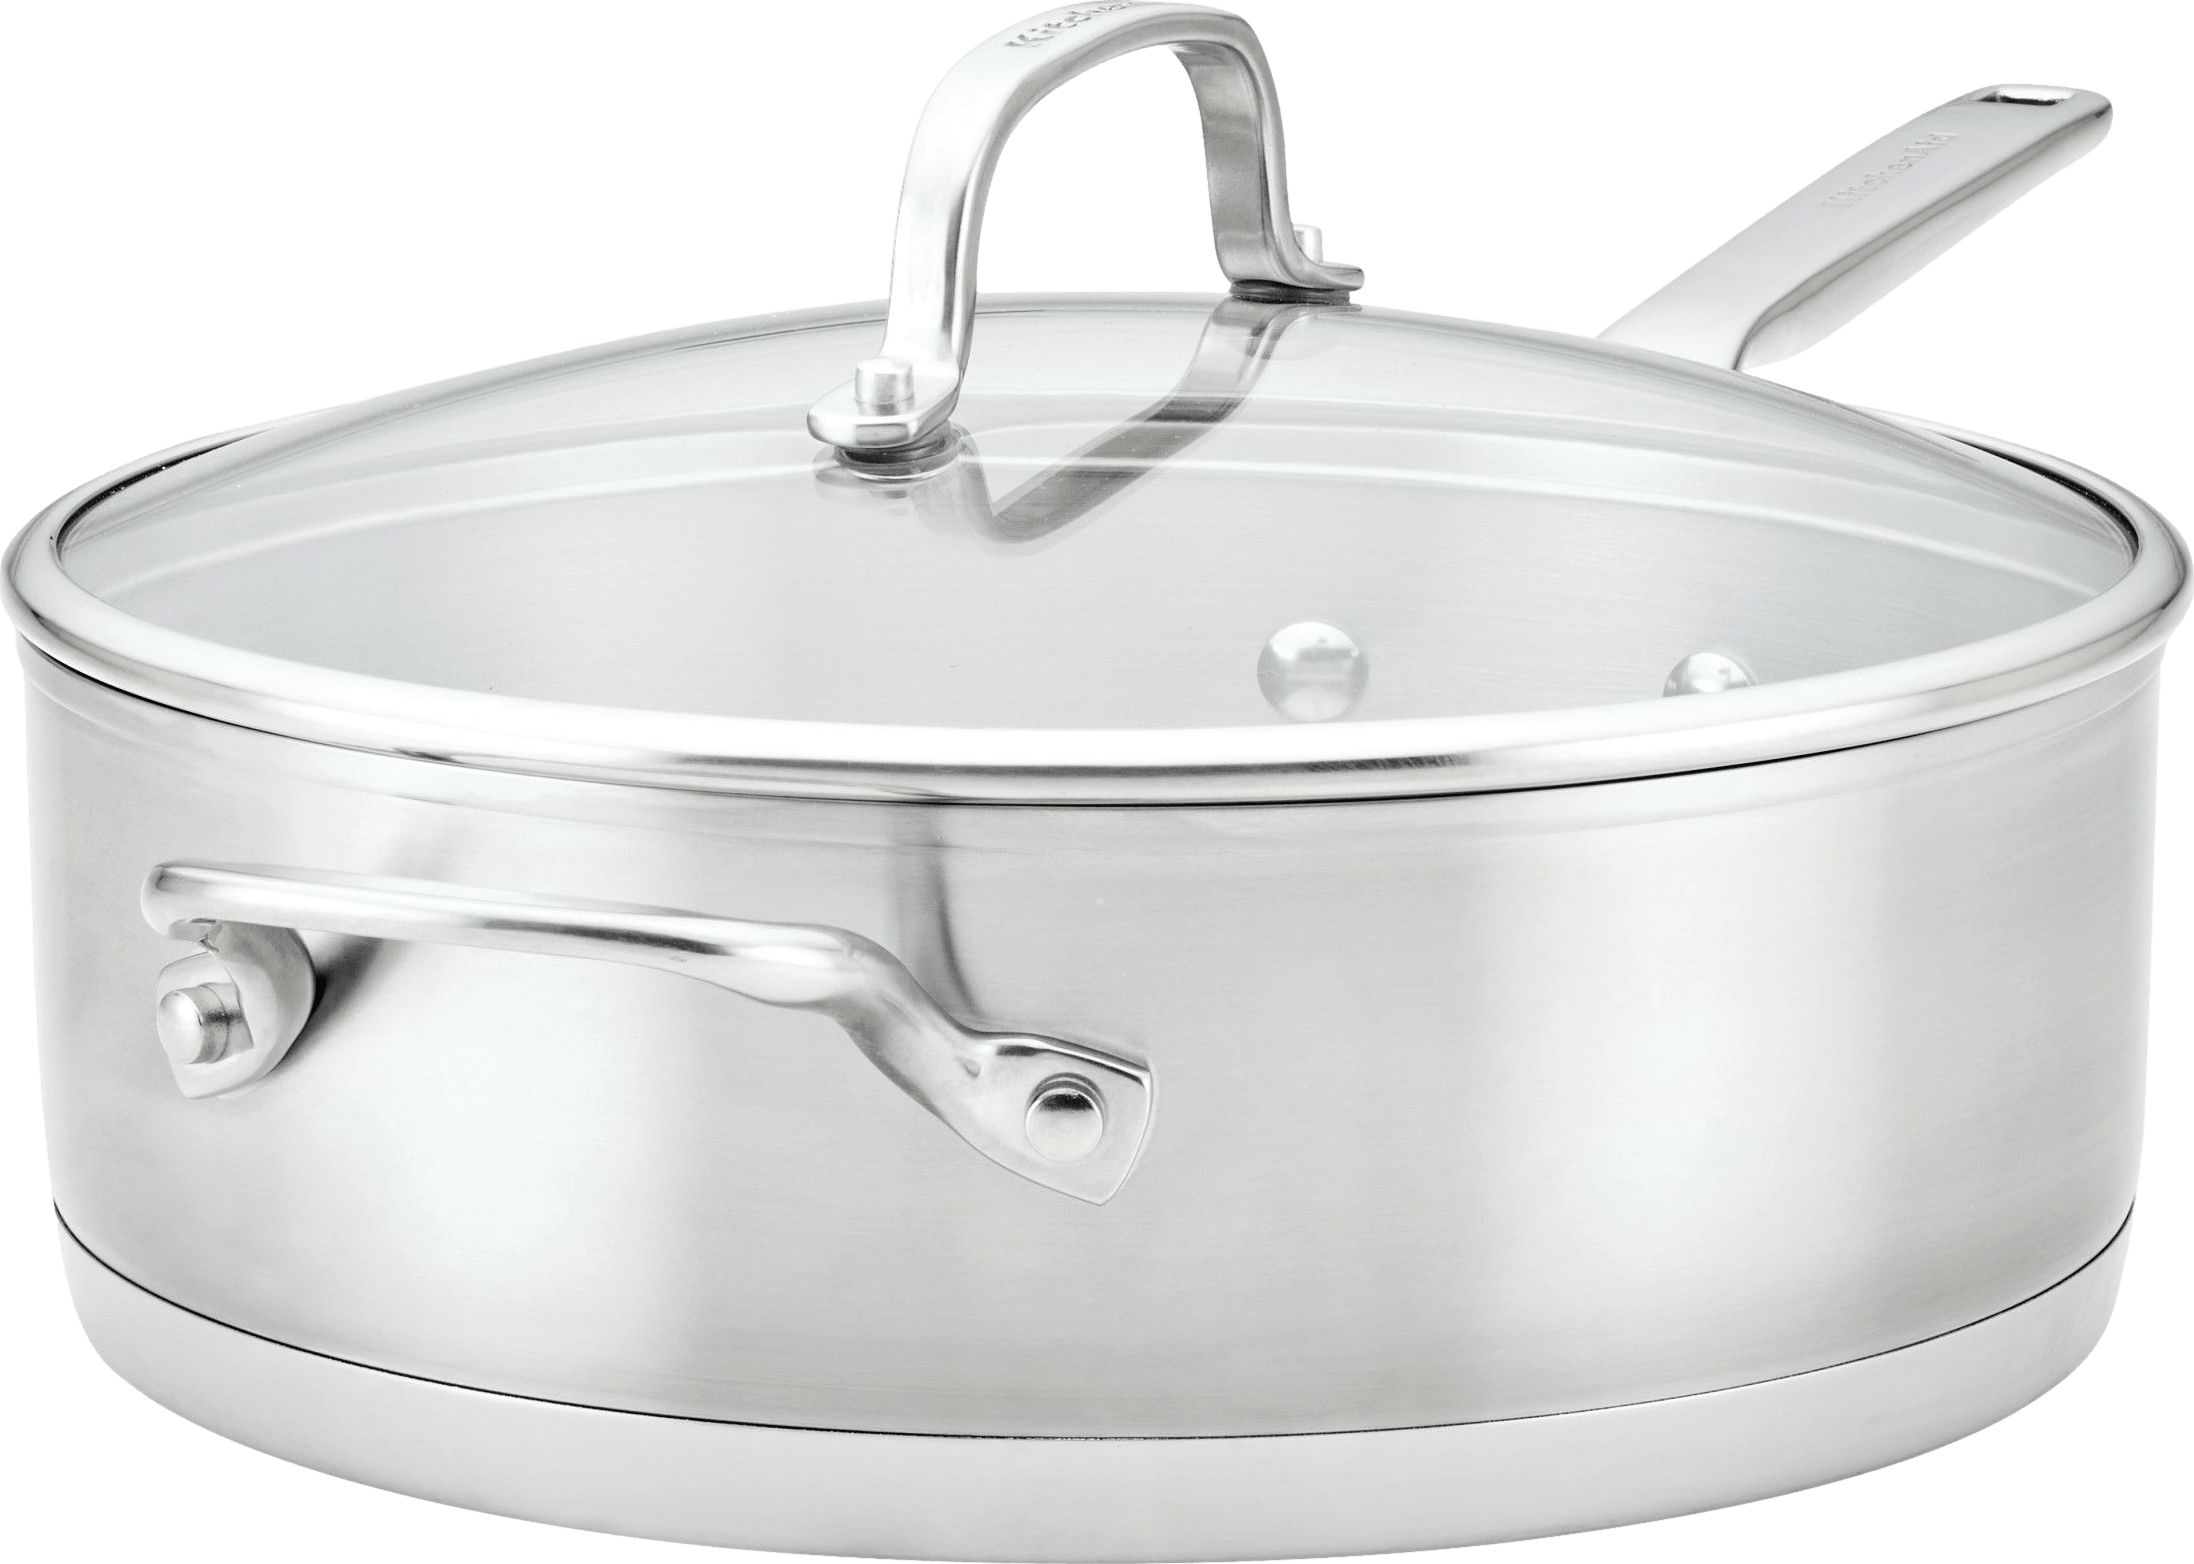 KitchenAid 3-Ply Base Brushed Stainless Steel Casserole Dish/Pan with Lid,  4 Quart